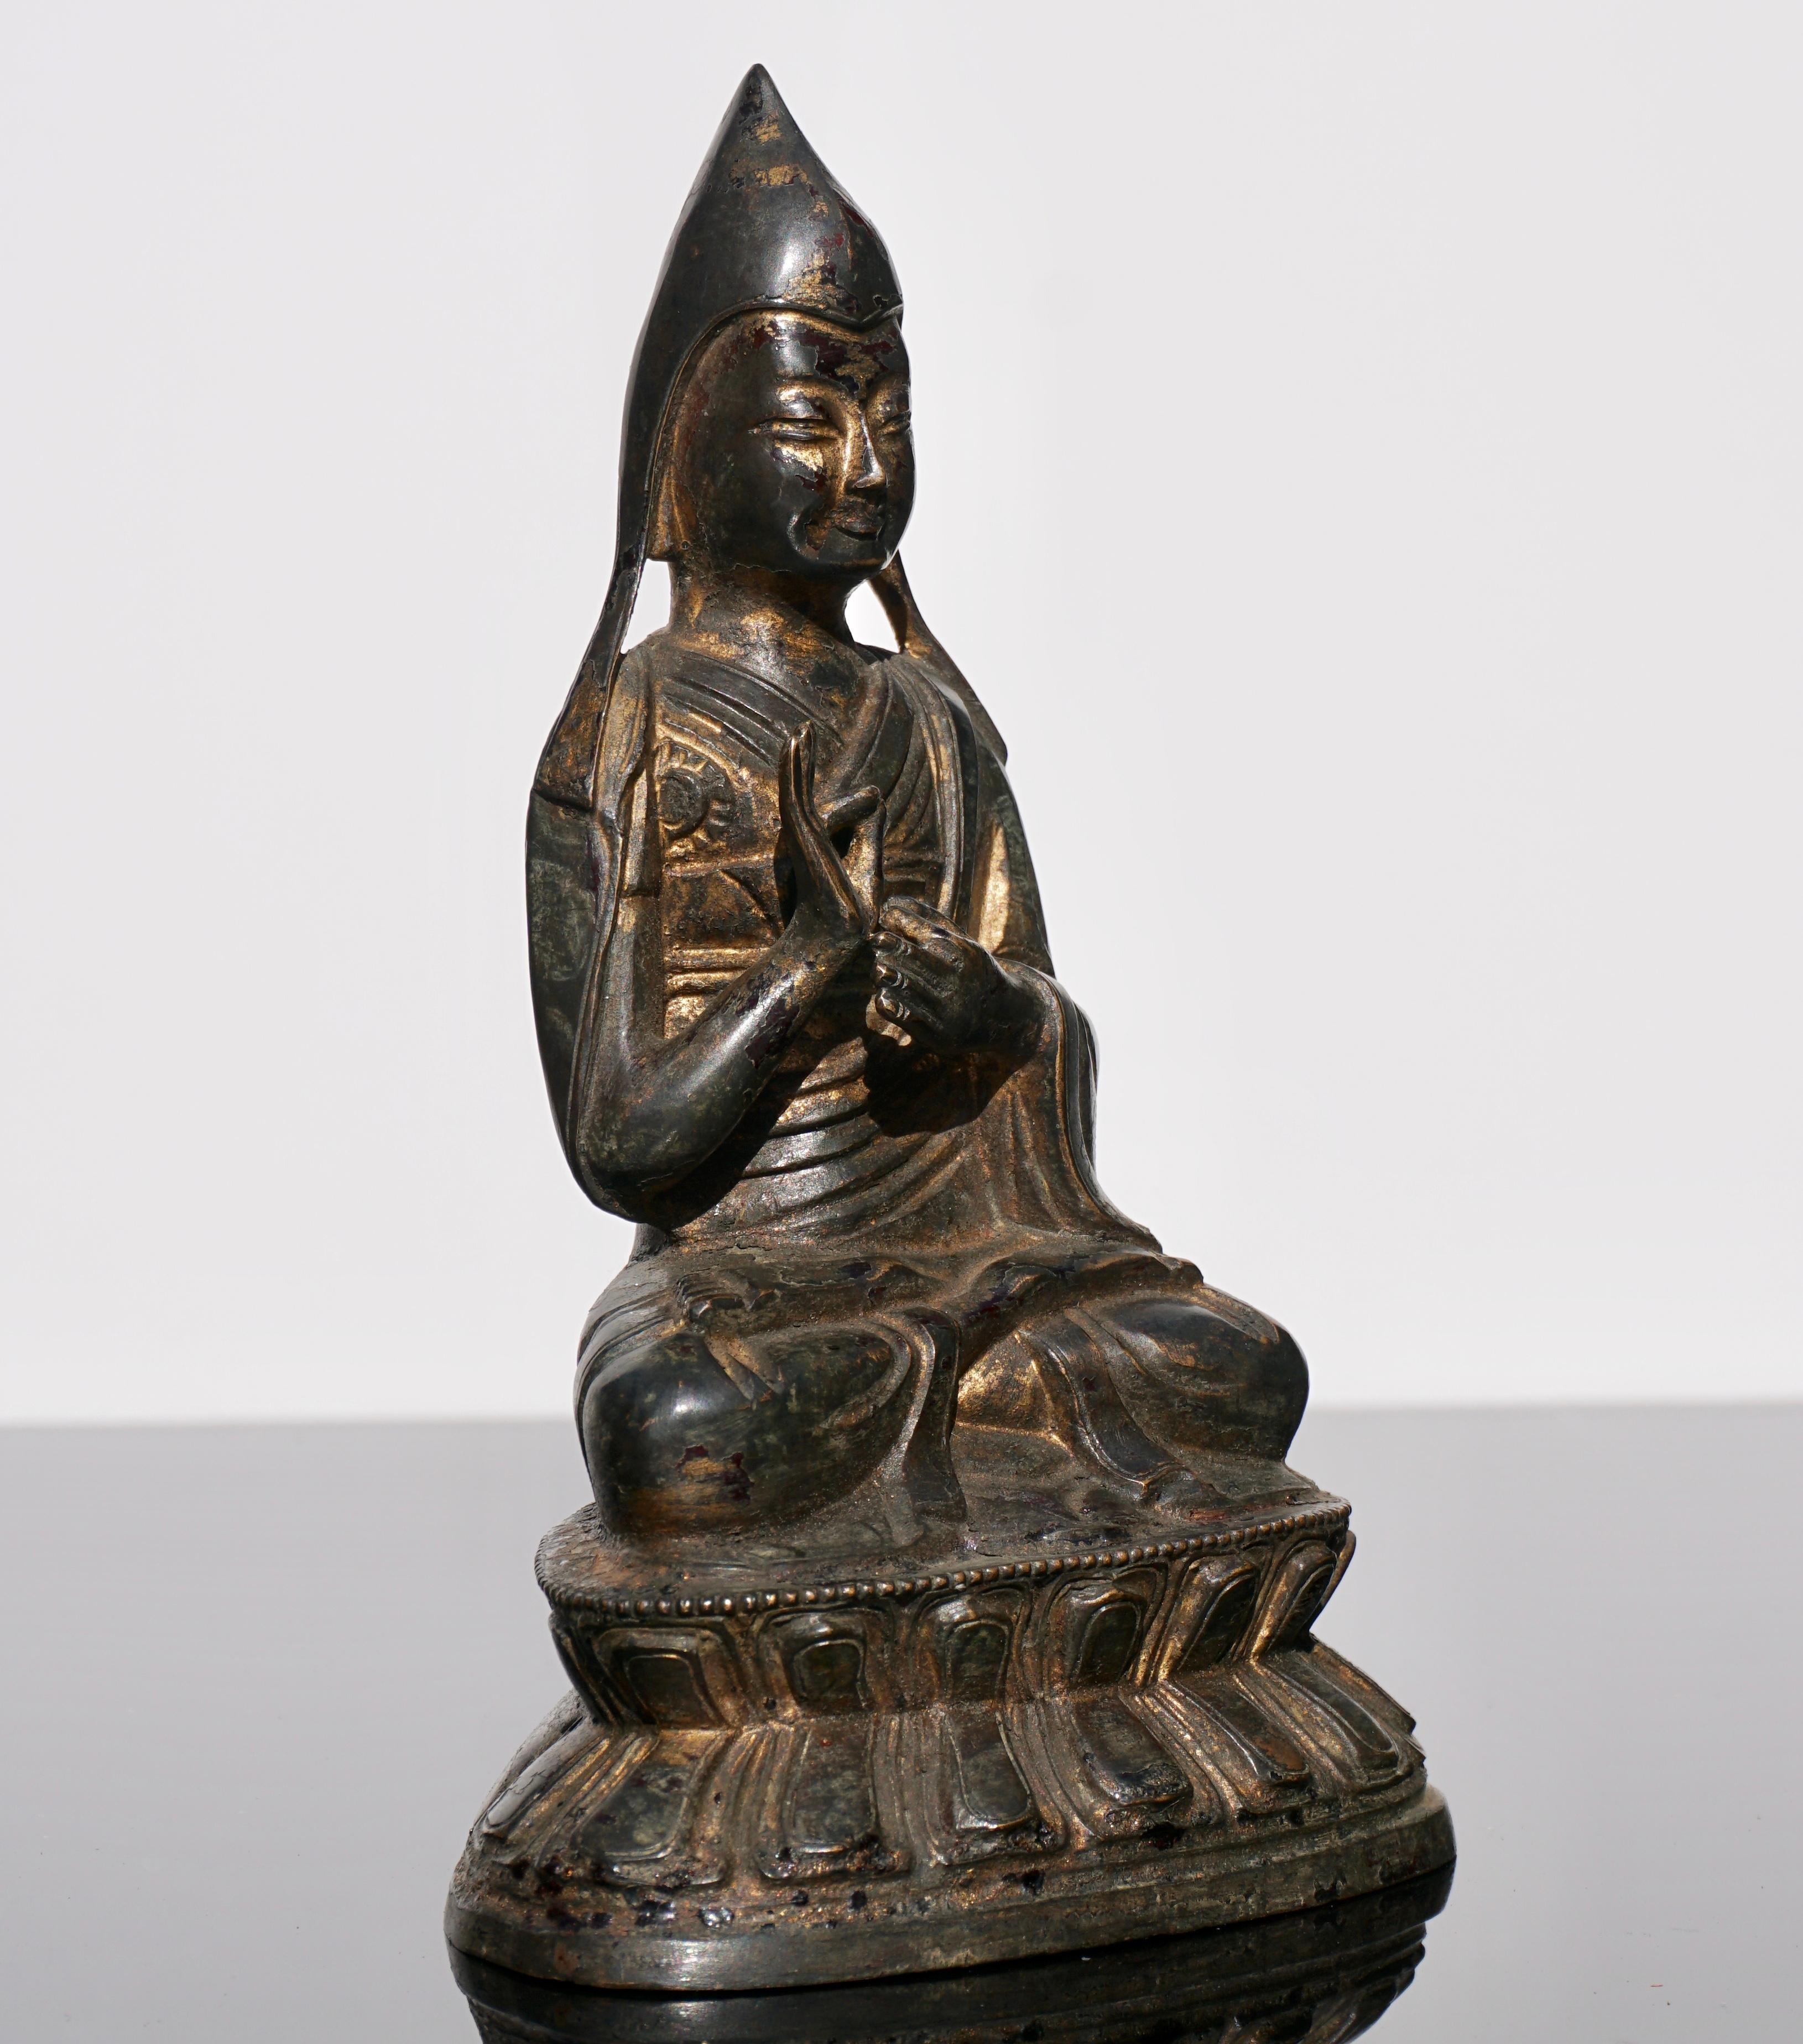 A gilt bronze figure of Tsong Khapa
Tibeto-Chinese, 18th-19th century
Seated on a double-lotus throne with hands in dharmachakra mudra, each holding the stem of a lotus, wearing a draping robe. His face with a benign expression, the lappets of his